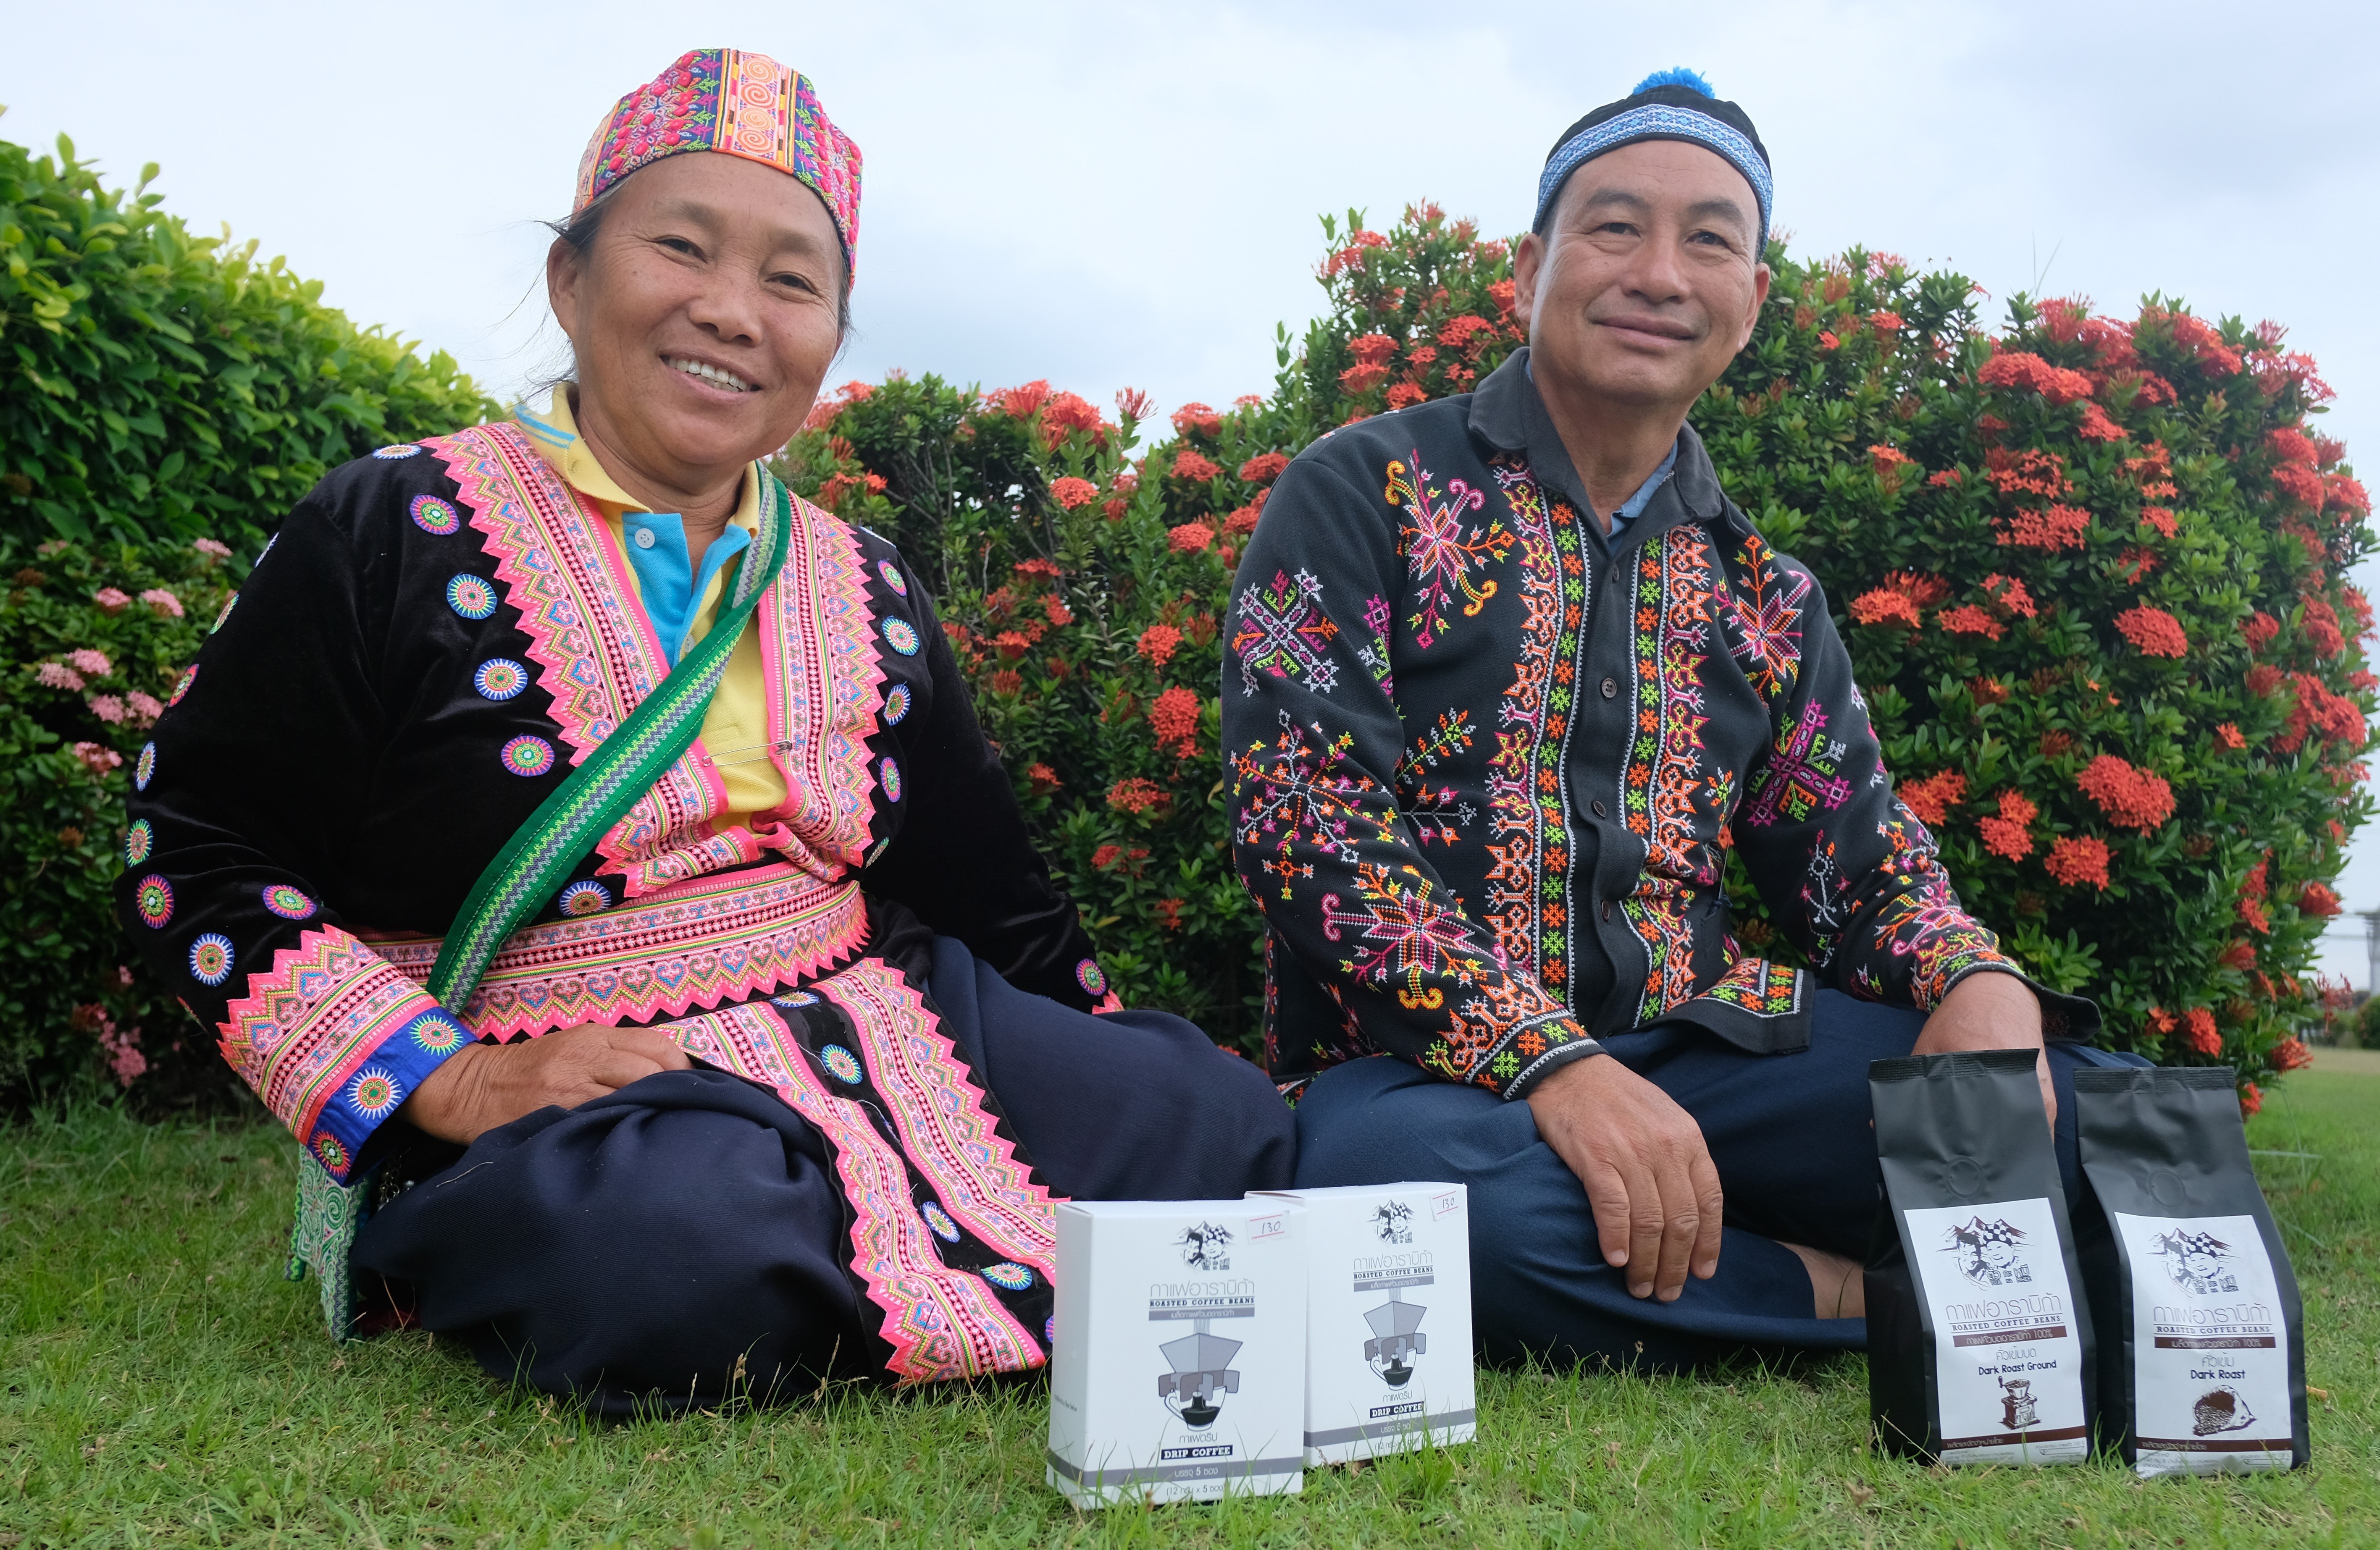 Tua and Mhee Jangaroon, an ethnic Hmong couple who live in a hilltribe village in Thailand's hilly north, grow and process their own brand of coffee Photo: Tibor Krausz [FEATUES 2019]